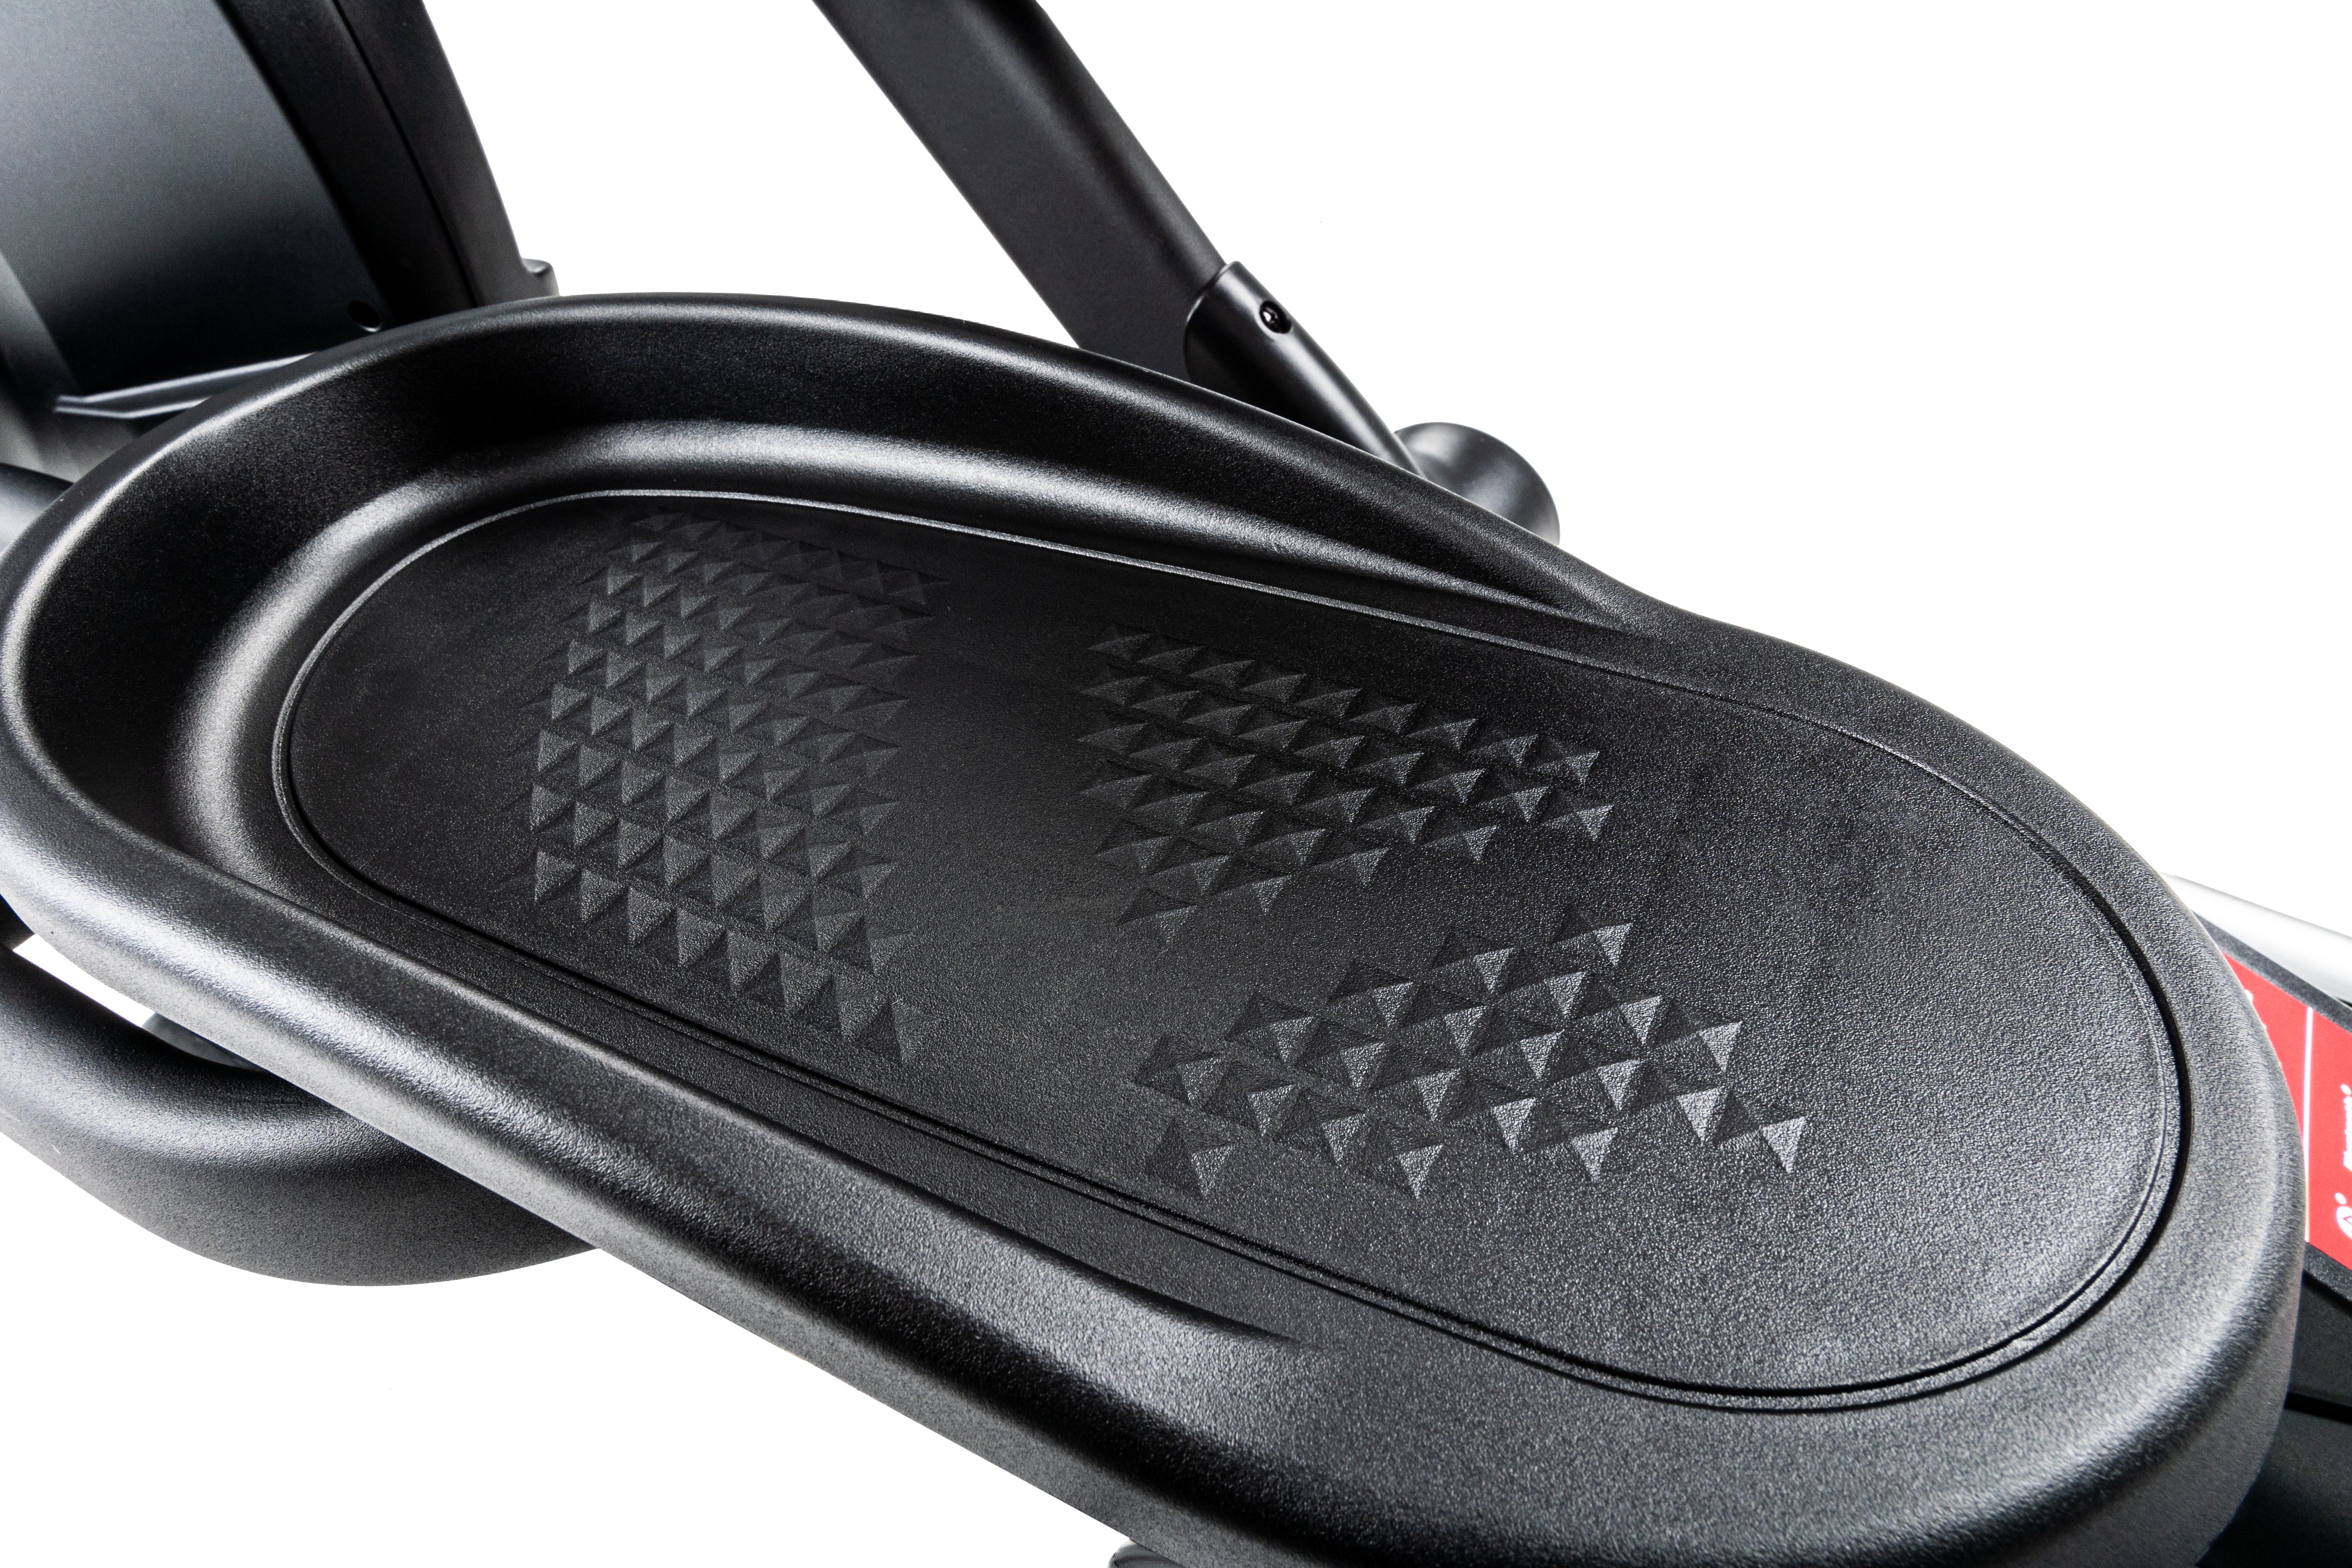 Close-up view of the Sole E25 elliptical's textured foot pedal, showcasing its black finish and geometric grip pattern for traction.